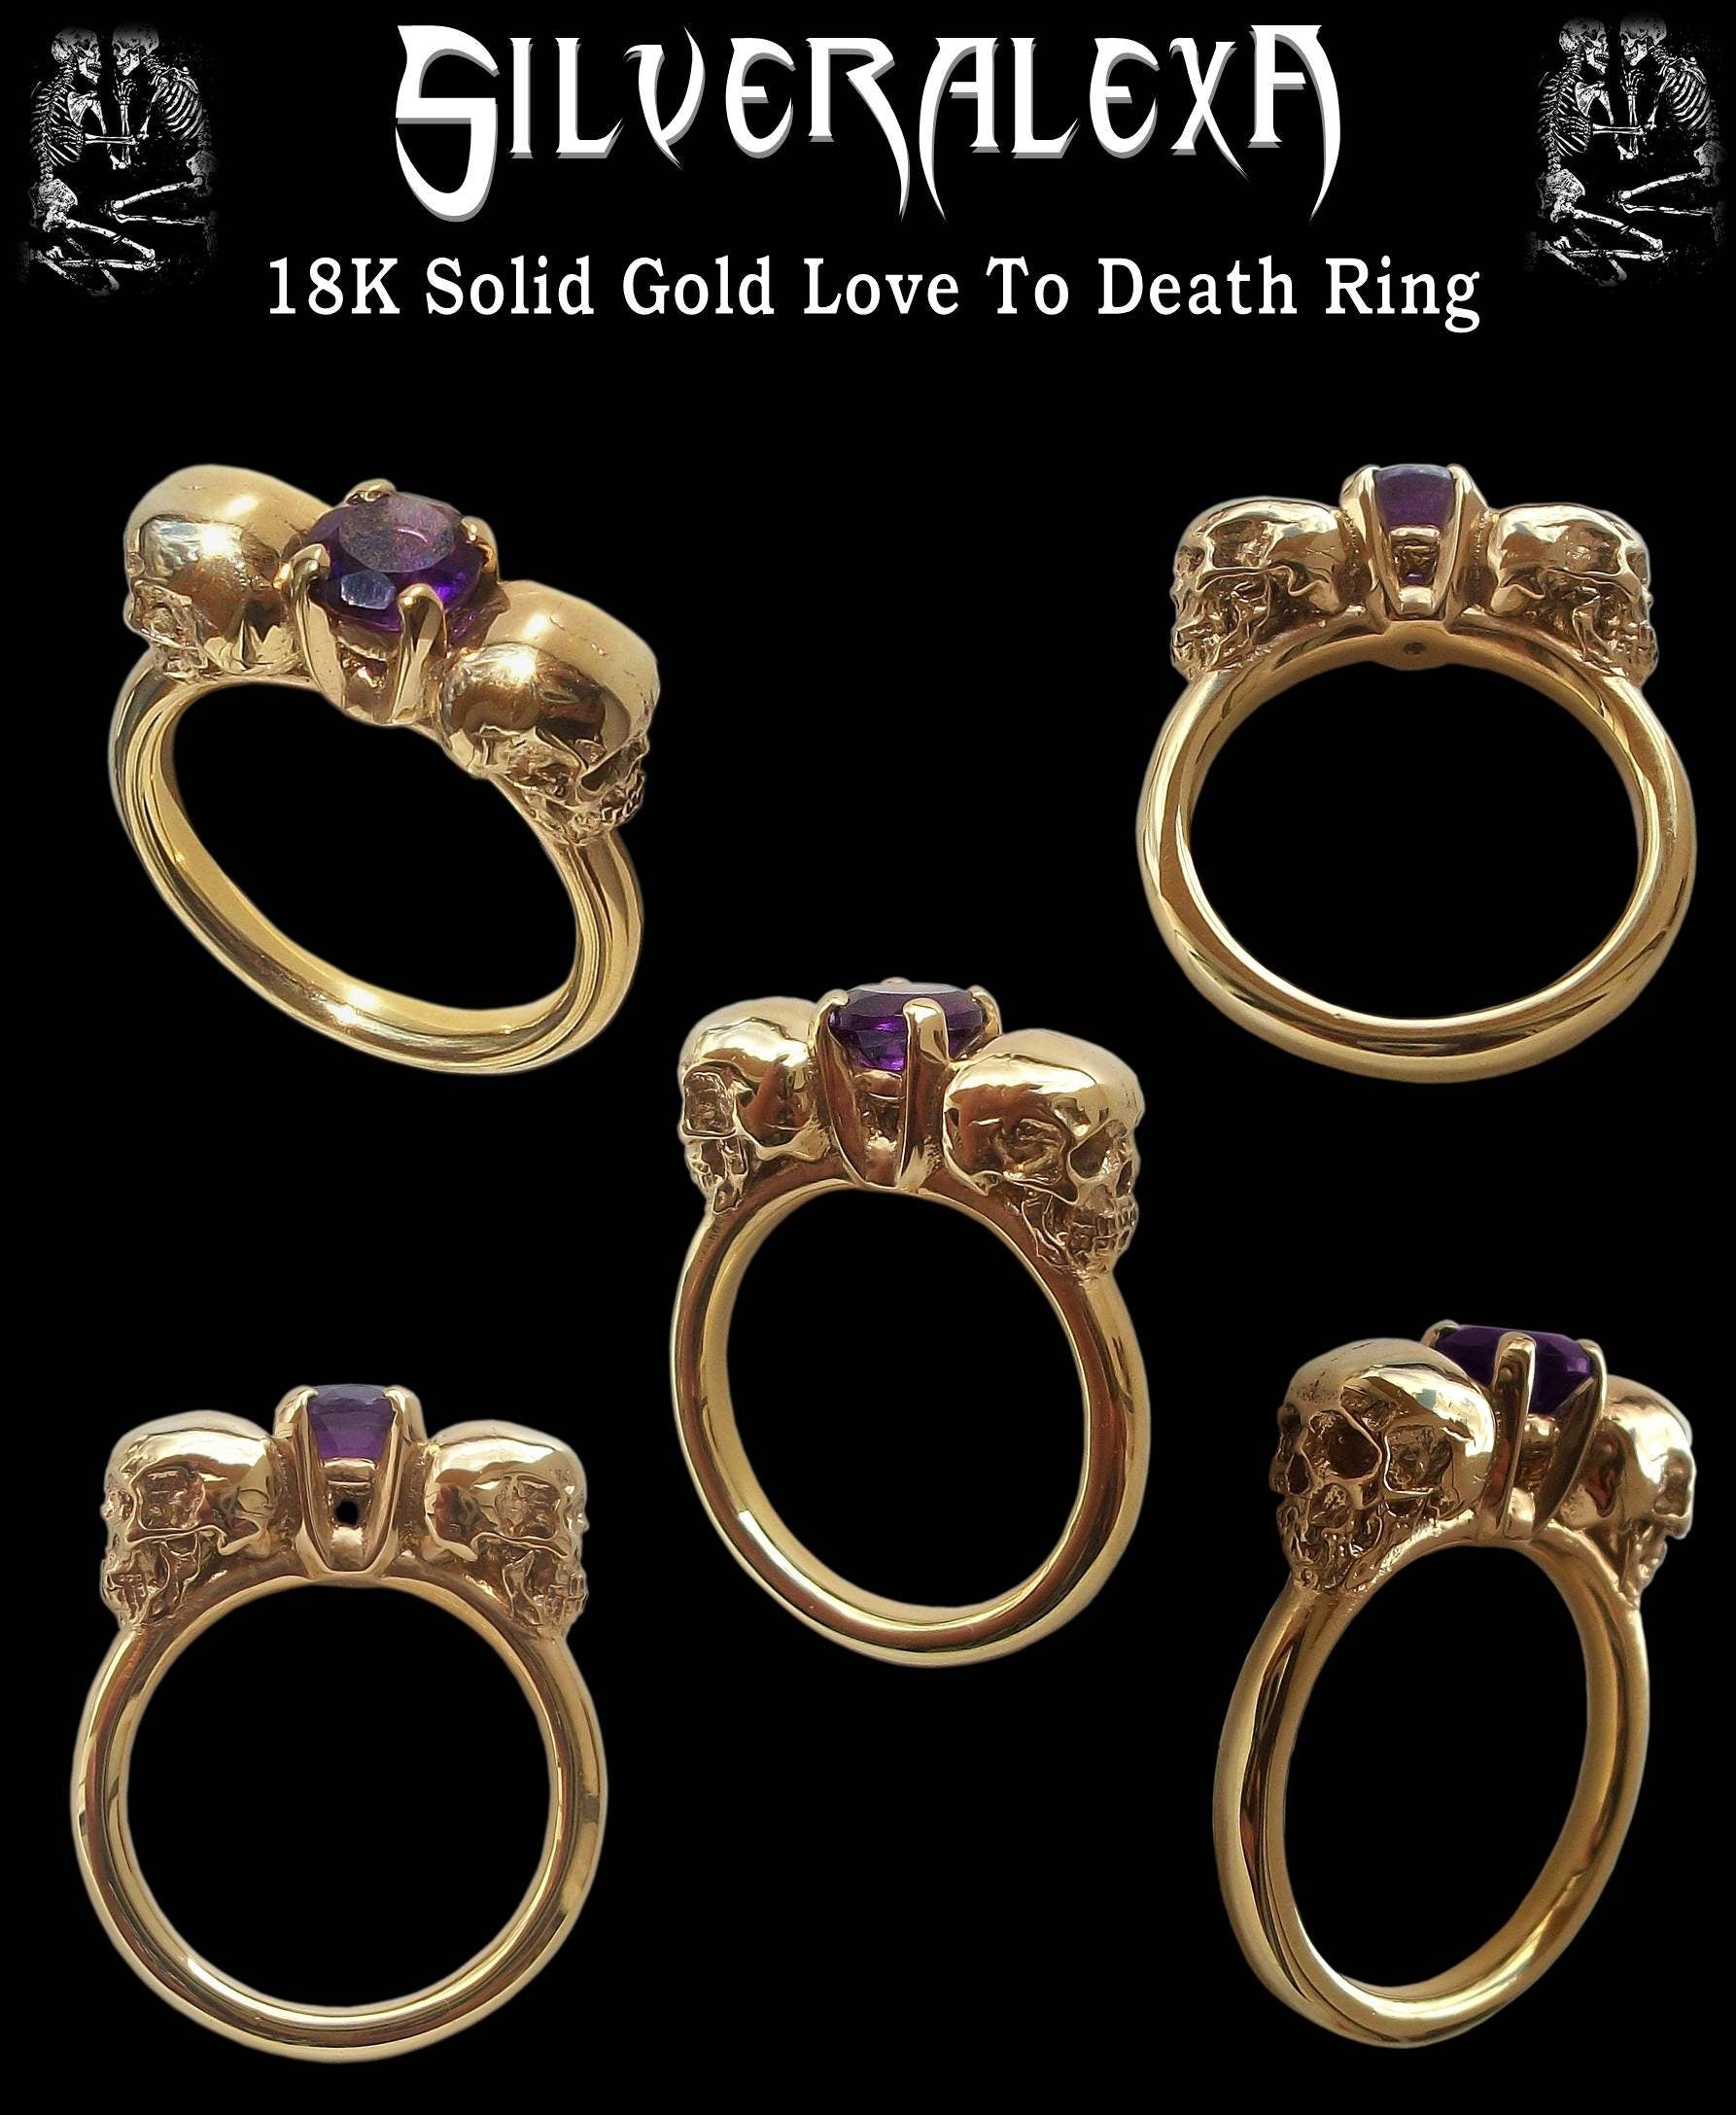 Skull ring - 18K Solid Gold Dark Gothic Skull Engagement Ring with Amethyst - Love to Death Ring Inspired by Lovers Of Valdaro